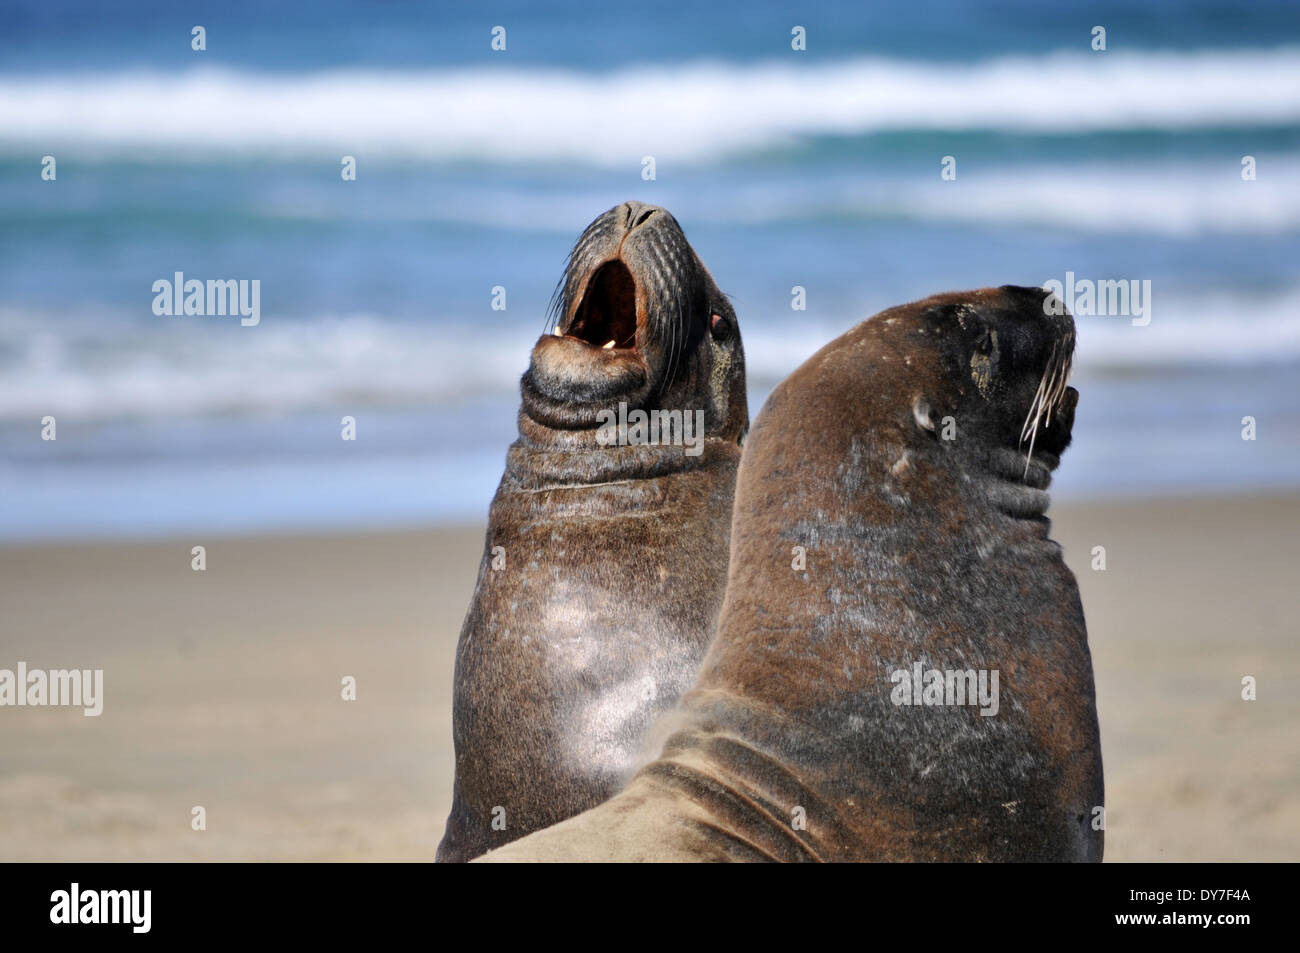 Endemic Hooker's sea lions, Phocarctos hookeri, one of the world's rarest species of sea lions, Catlins coast, New Zealand Stock Photo